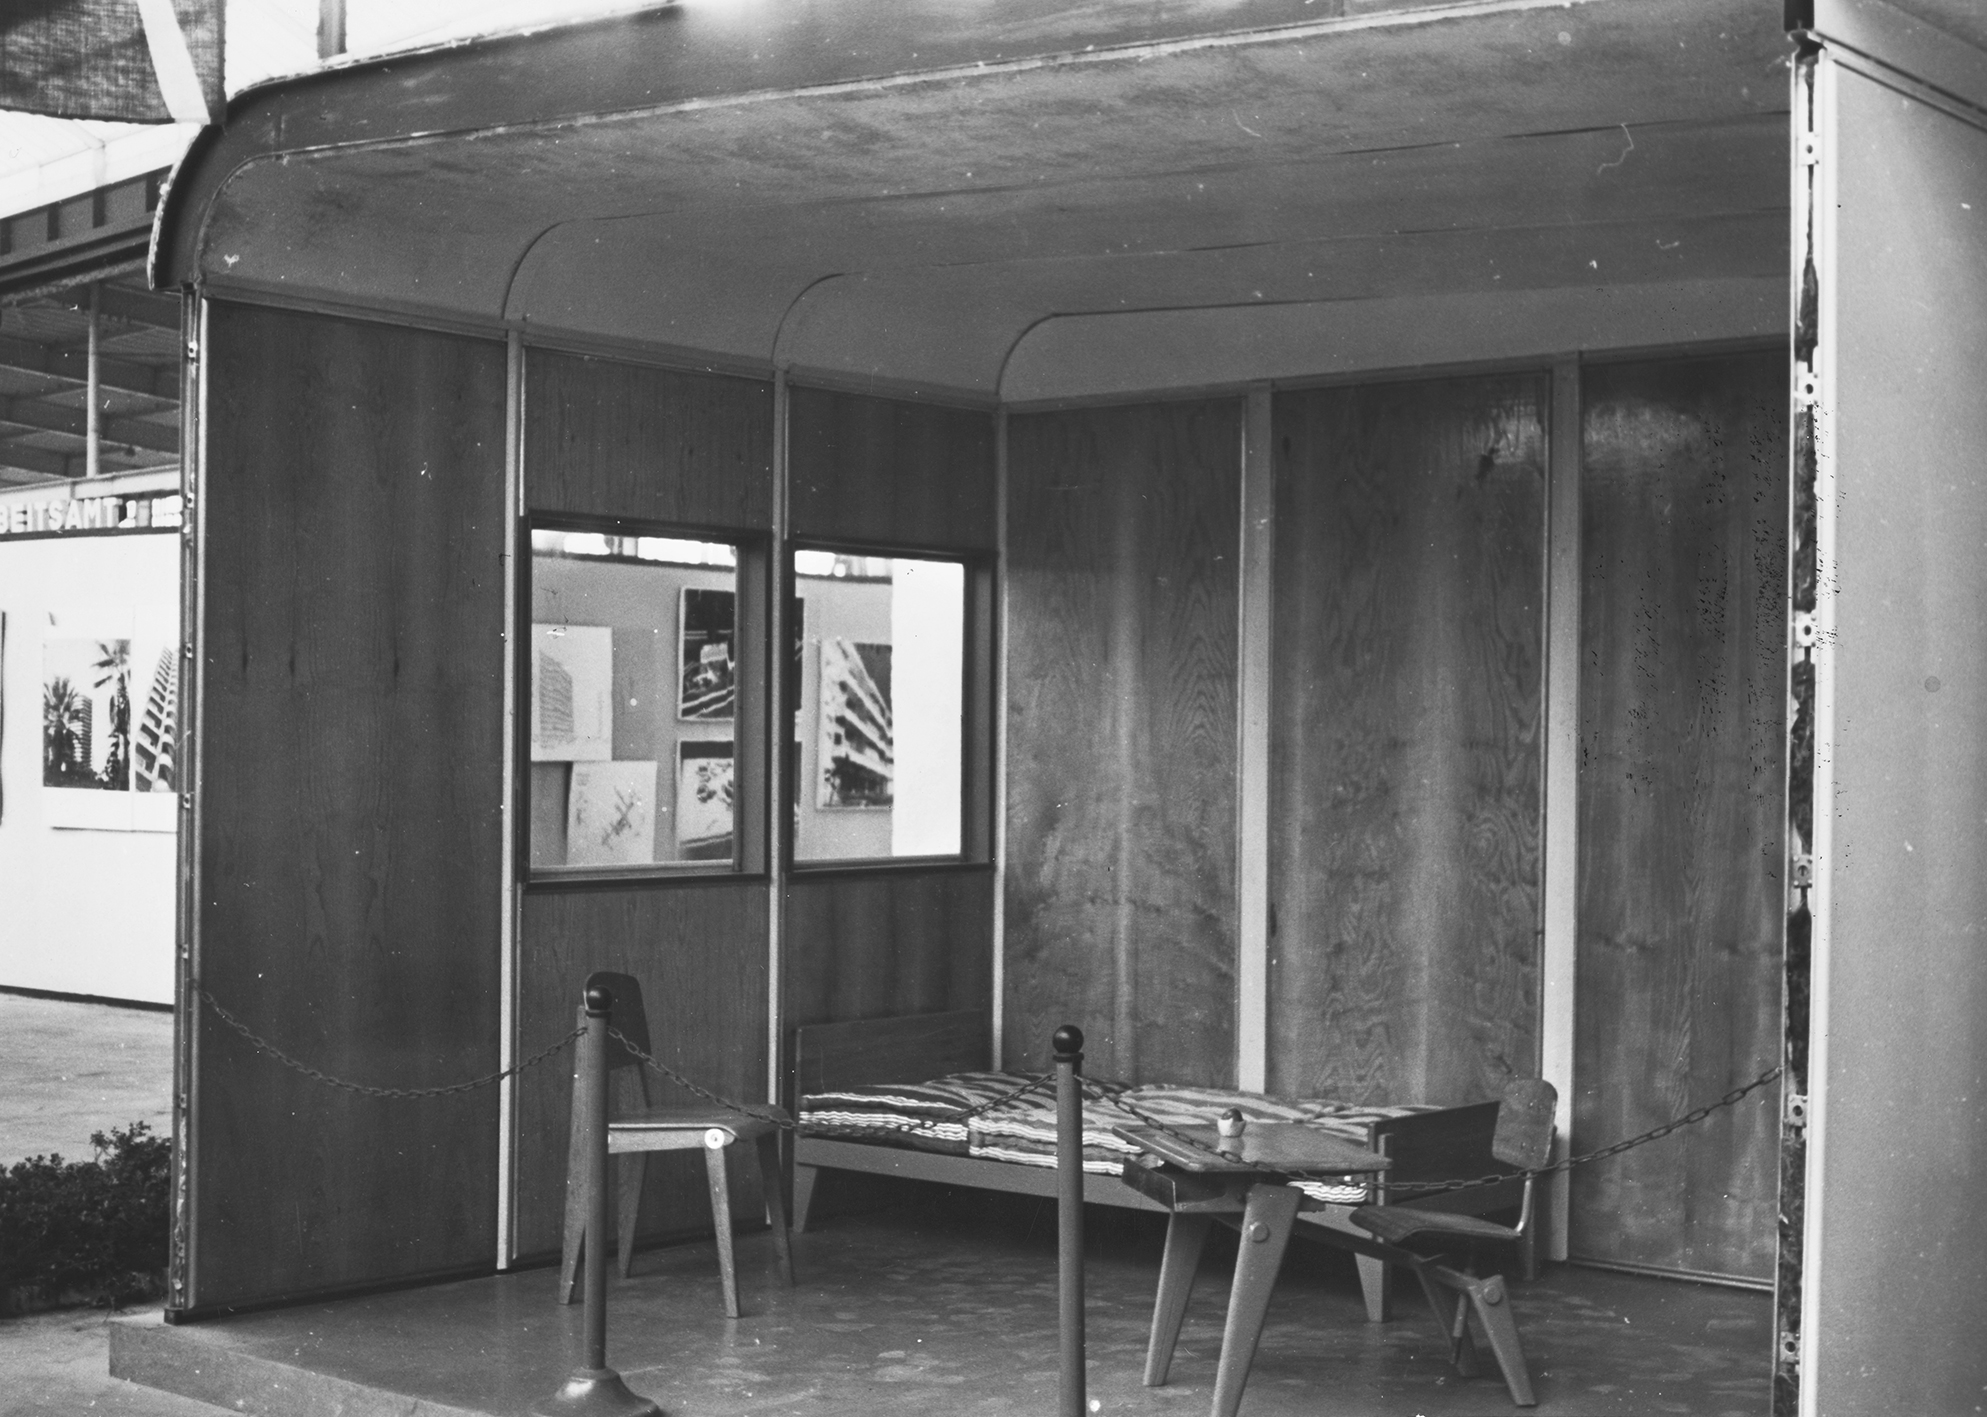 Salon des Arts Ménagers home show, Housing section, Paris, 1953. The Ateliers Jean Prouvé stand. Coque house furnished with a Flavigny bed, a CB 22 chair, and a single-seater desk.